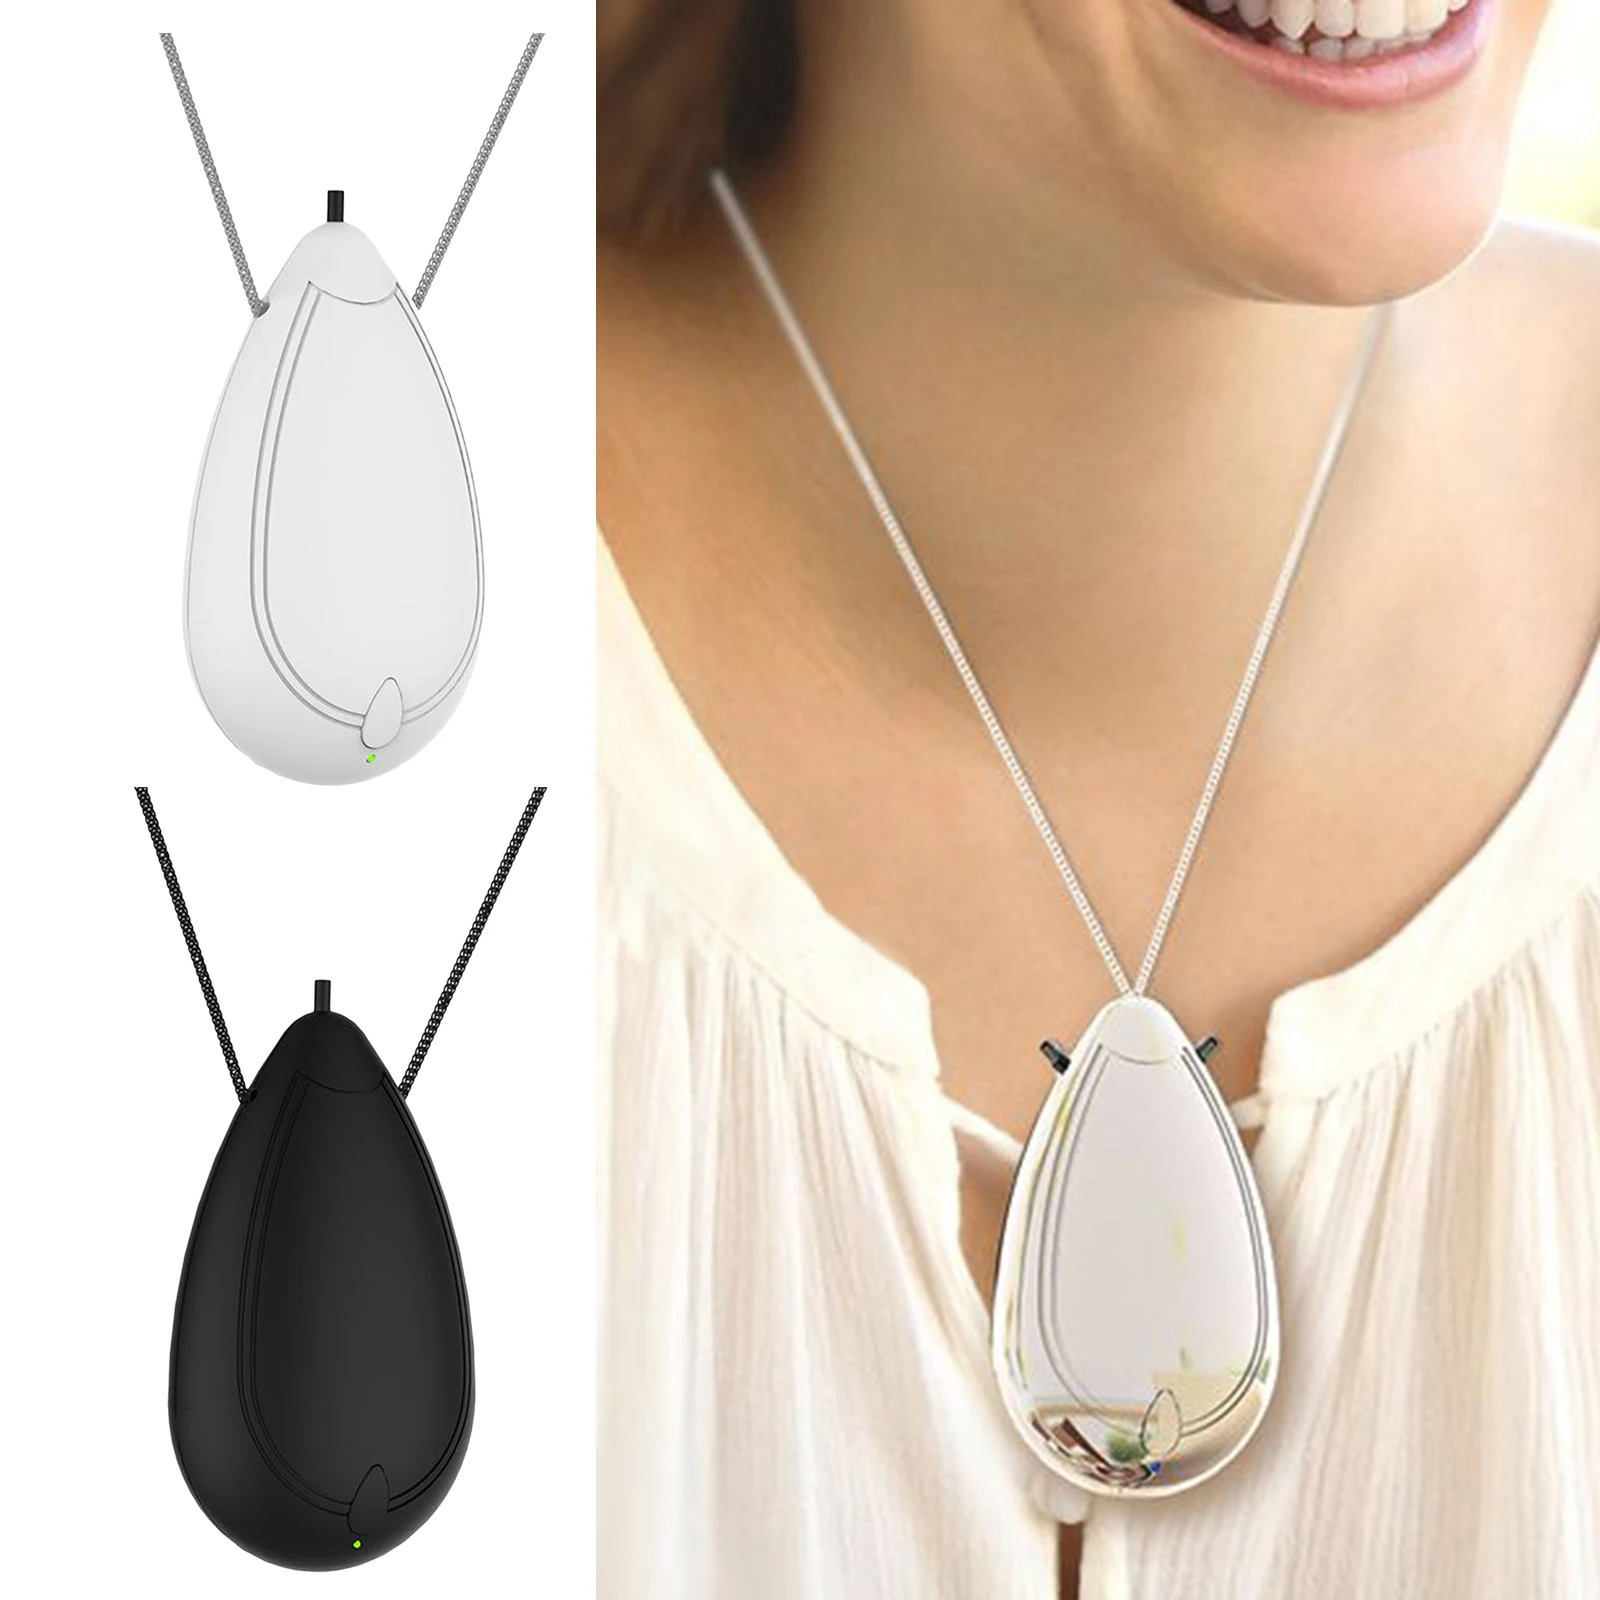 Mini Necklace USB Air Purifier Negative Ion Generator Ionizer Portable Gifts